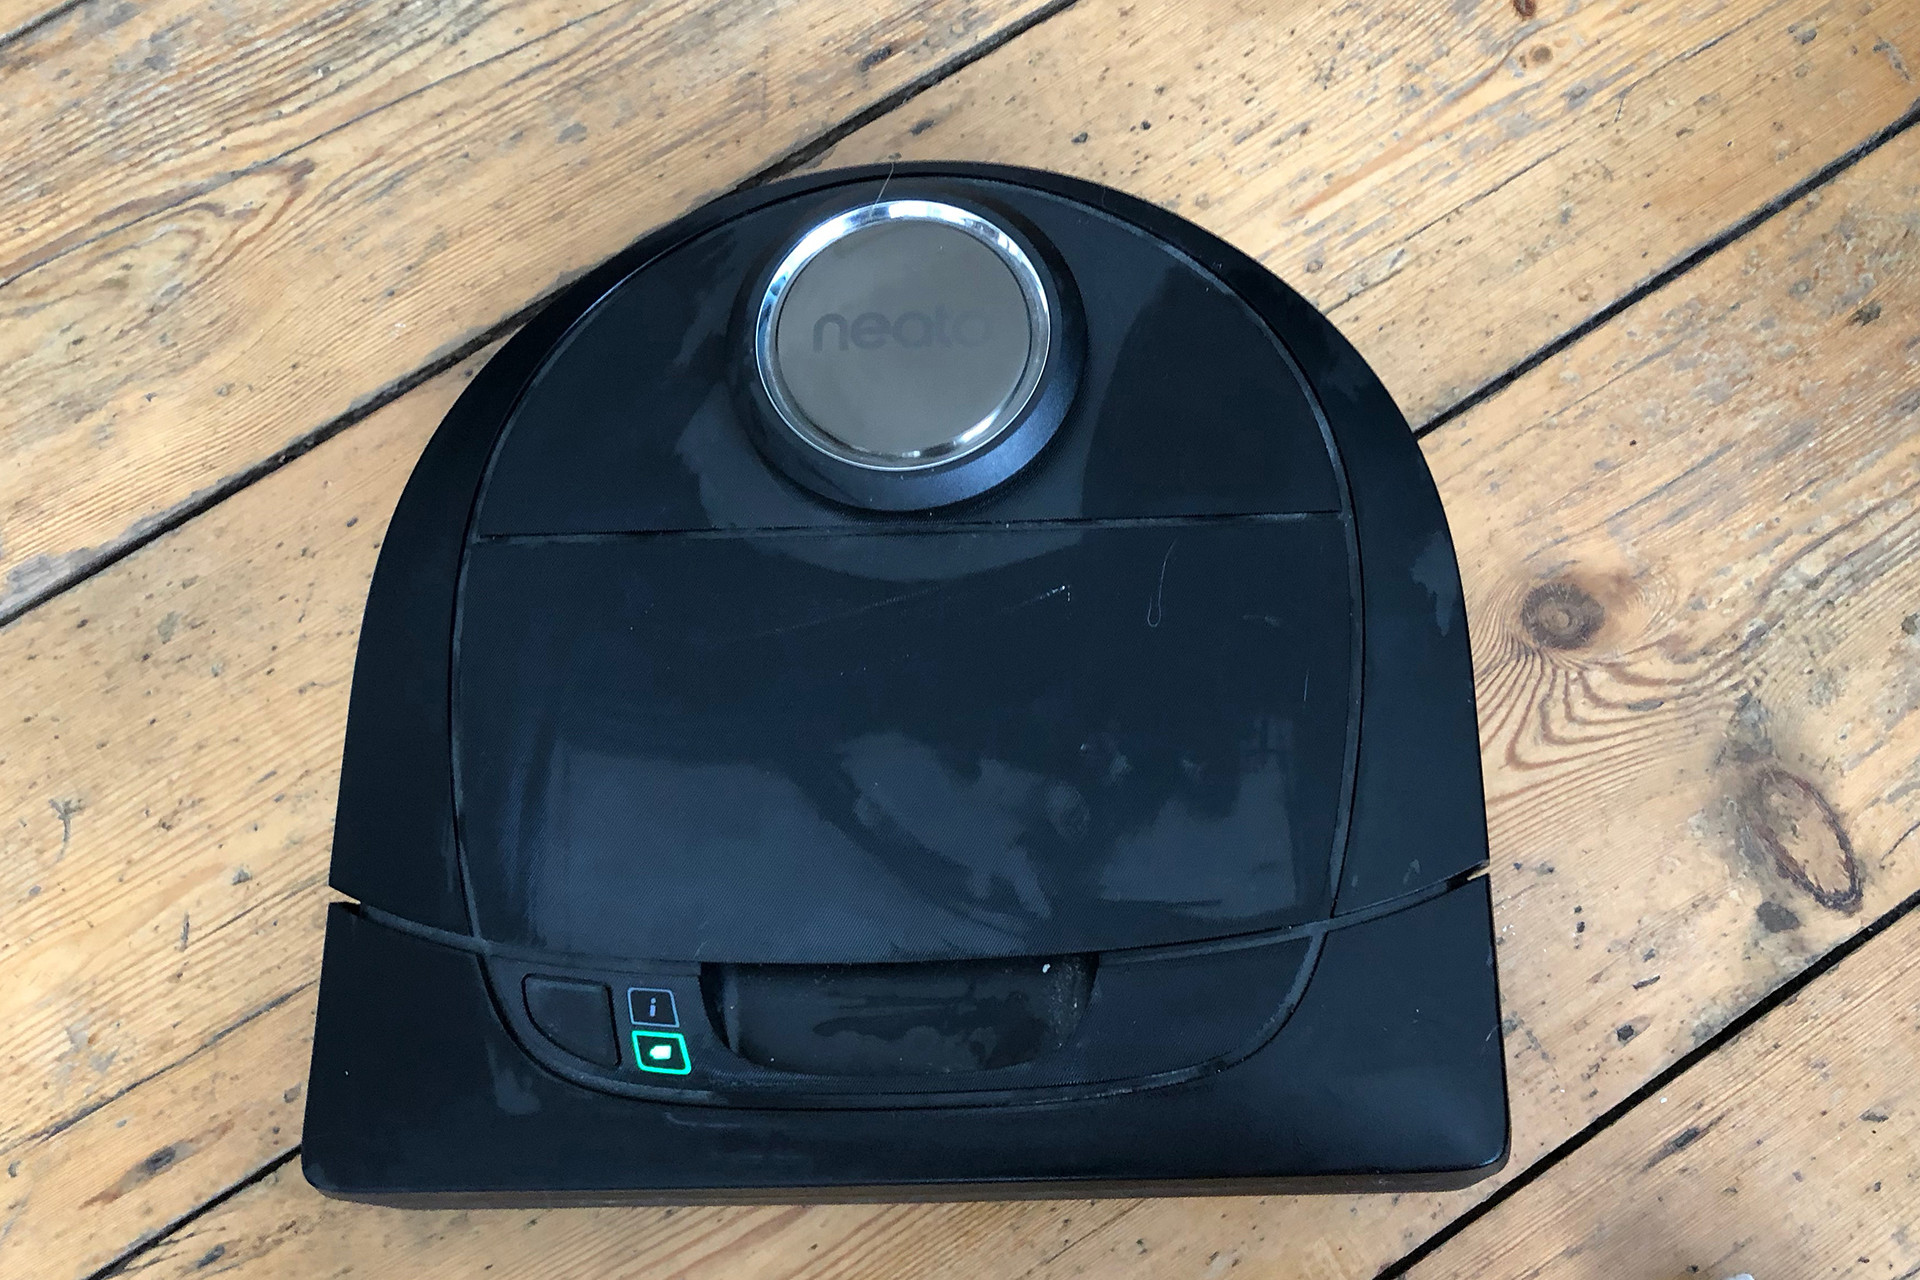 11 Lovable Lightweight Hardwood Floor Vacuum Reviews 2024 free download lightweight hardwood floor vacuum reviews of neato botvac d5 connected review trusted reviews with regard to neato botvac d5 connected from above